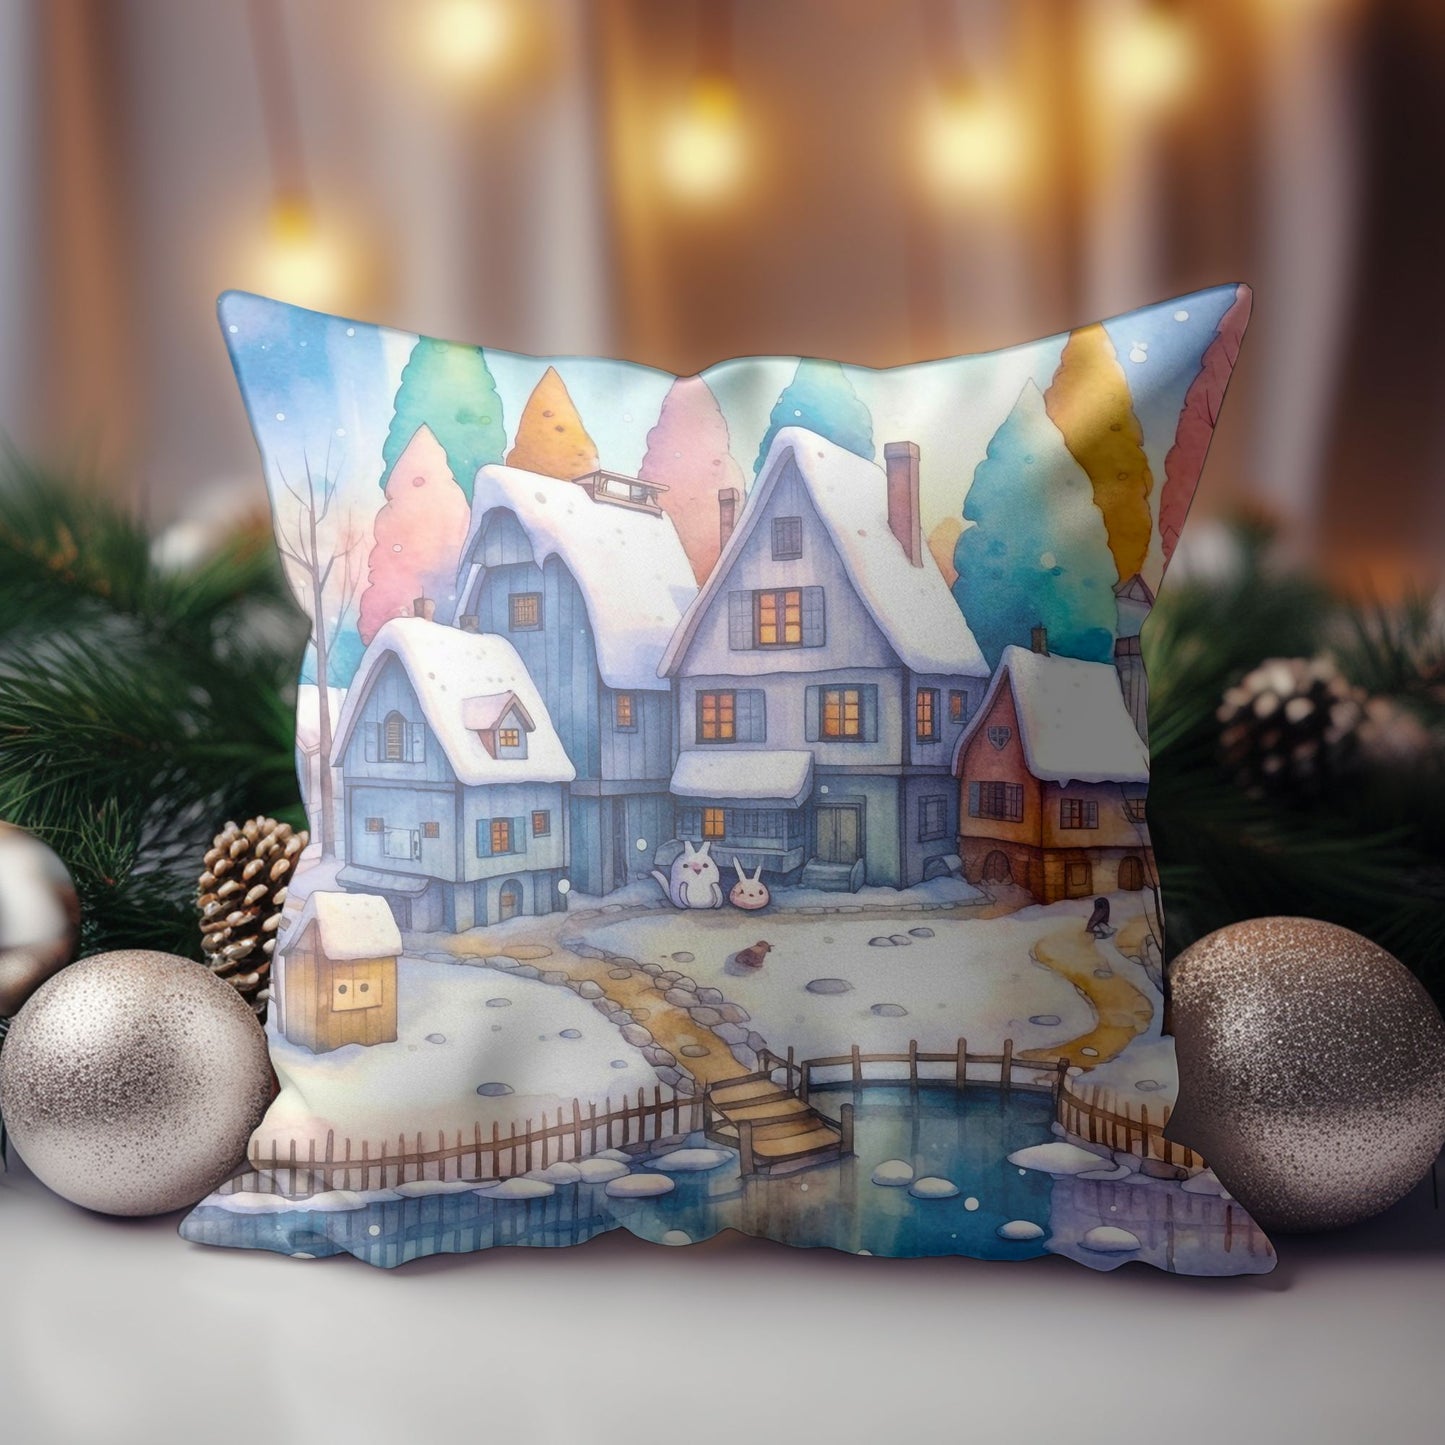 Holiday Decorative Accent with a Charming Village Design